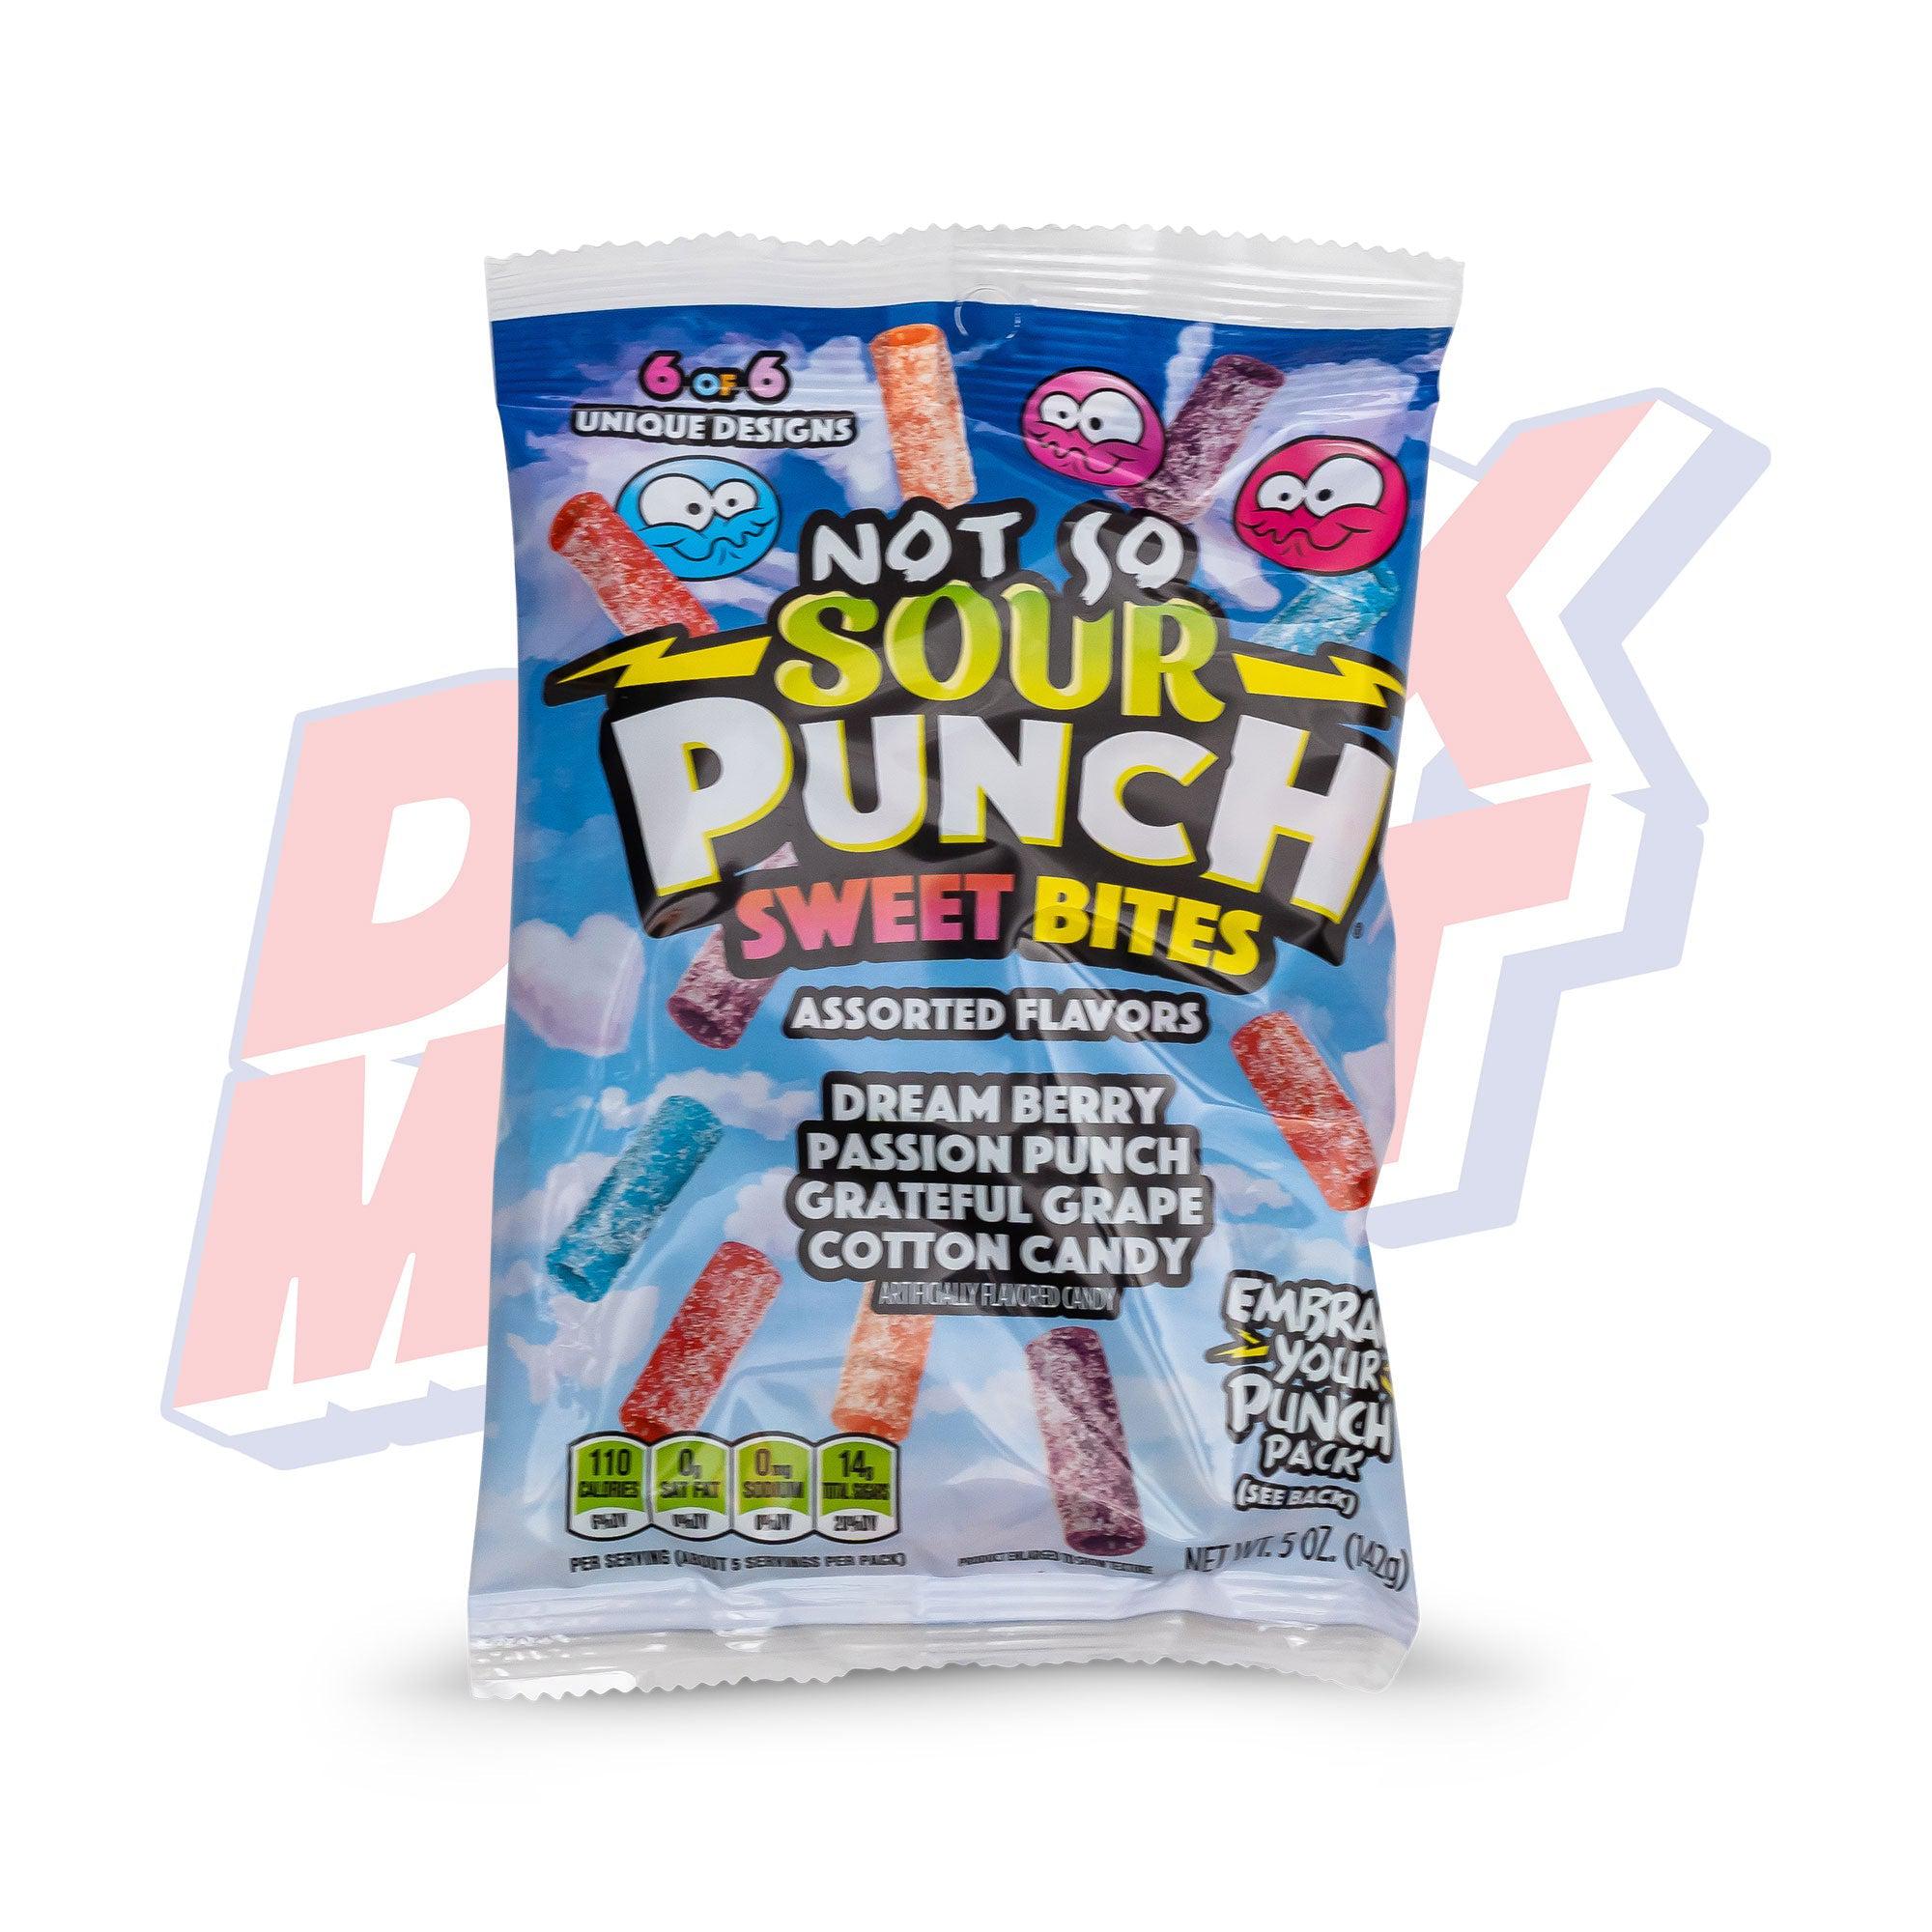 Sour Punch Sweet Bites Assorted - 5oz